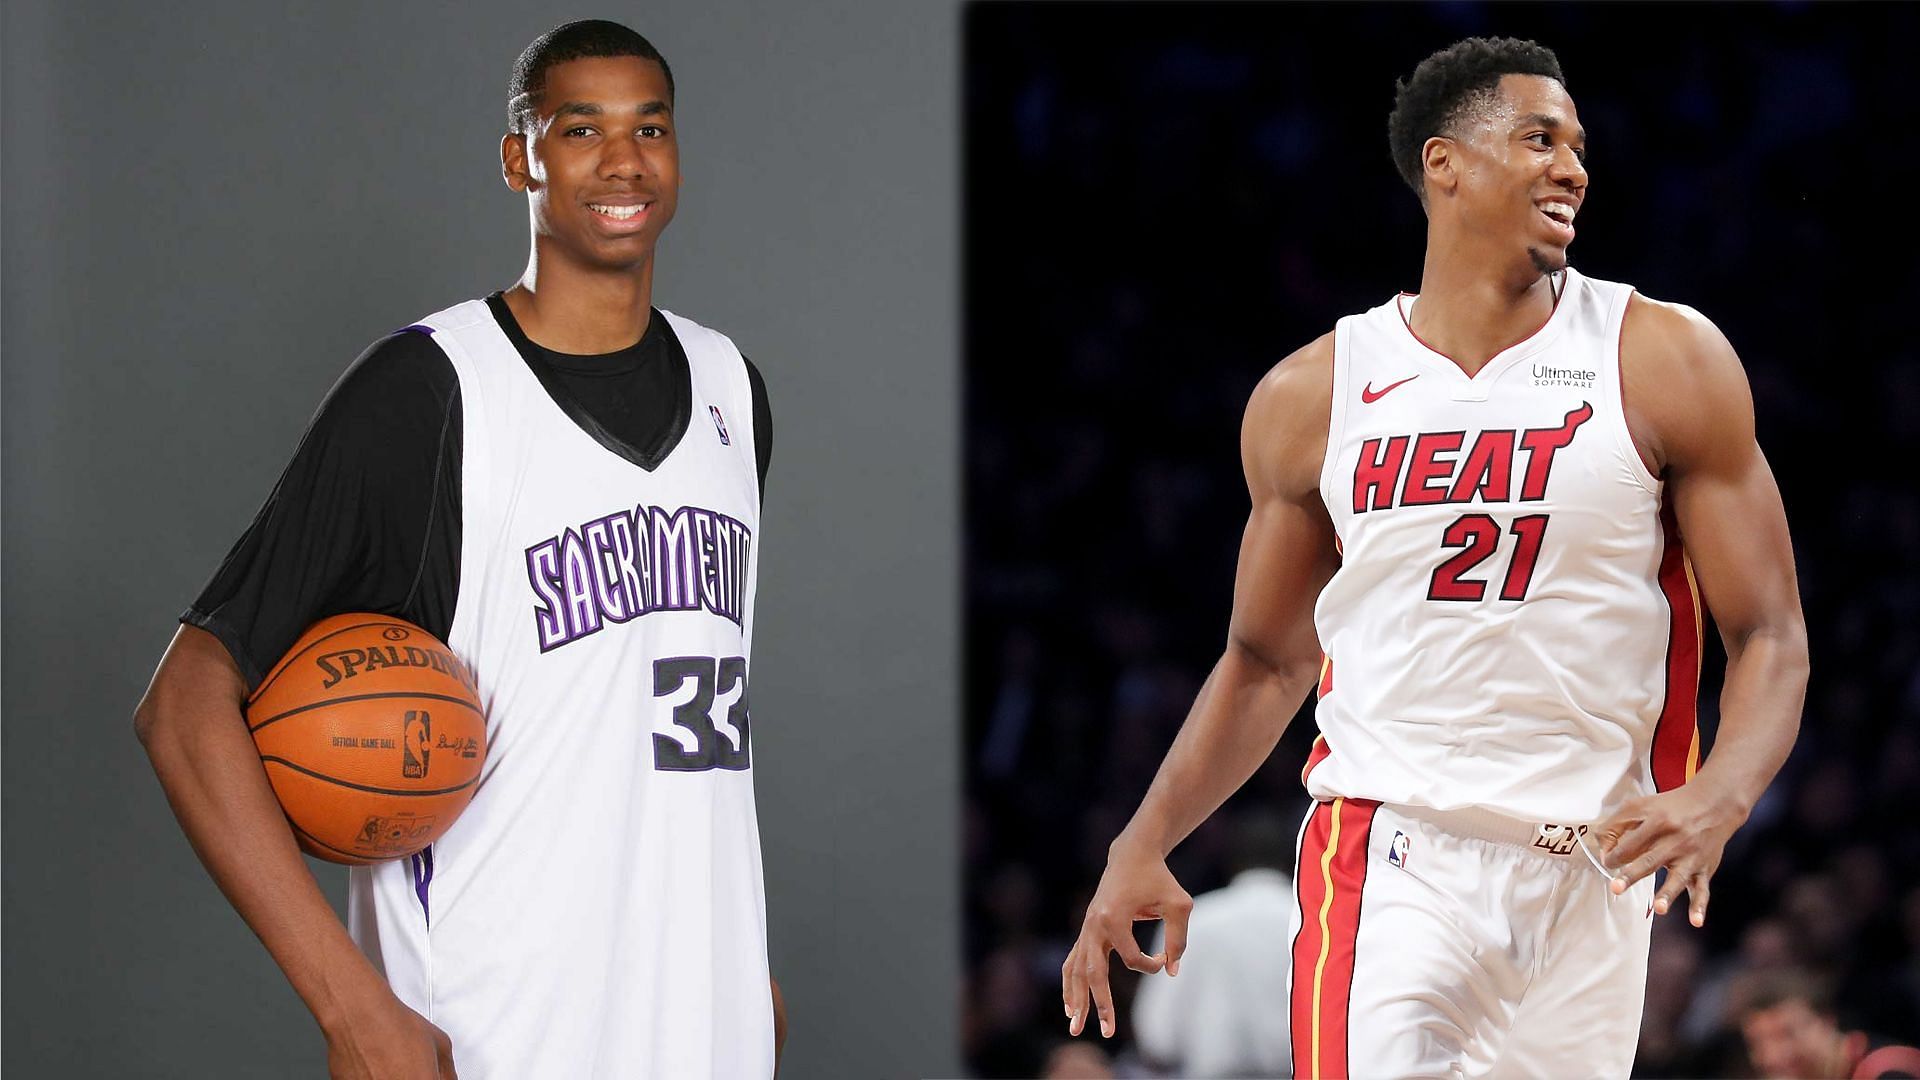 Whiteside was one of the most improved NBA players